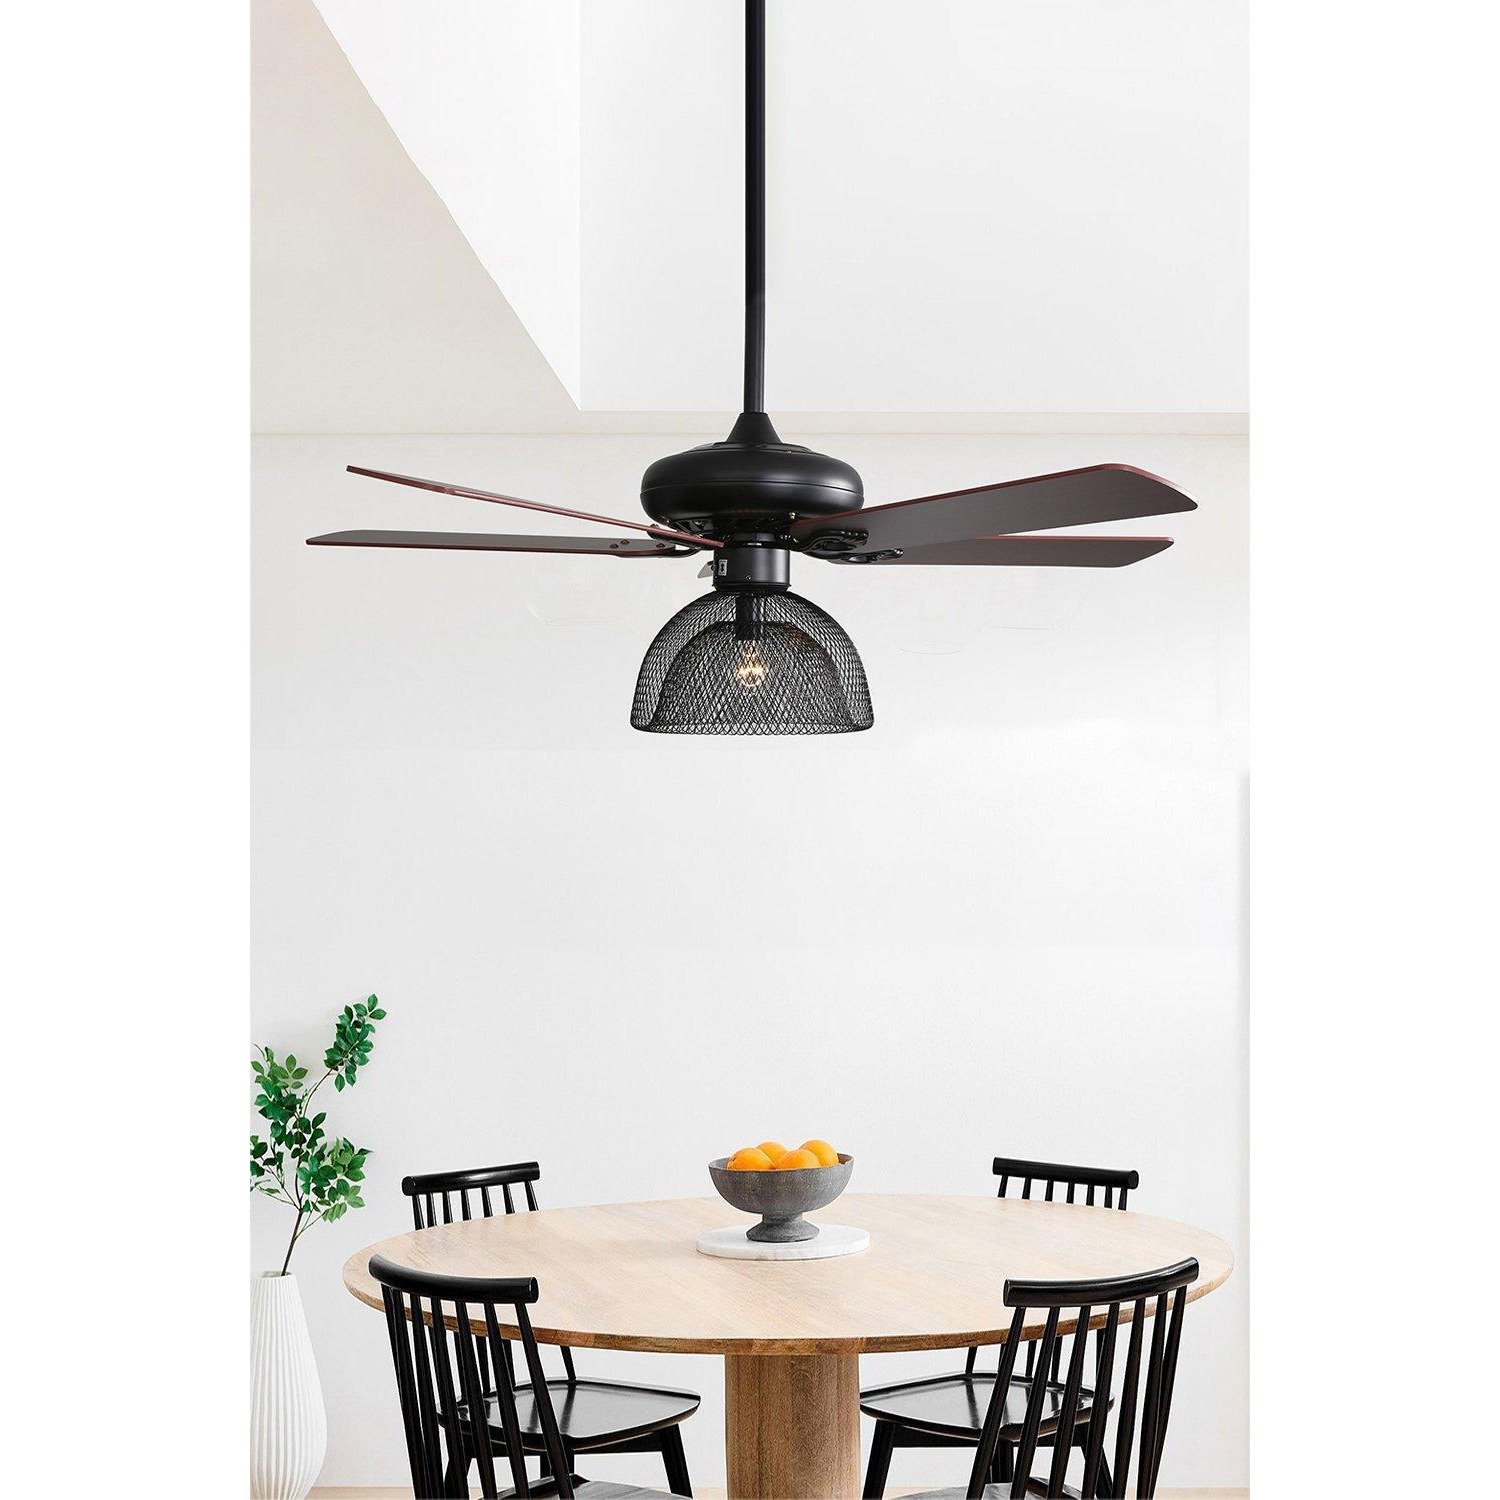 Industrial 5-Blade Ceiling Fan Light with Remote - image 1